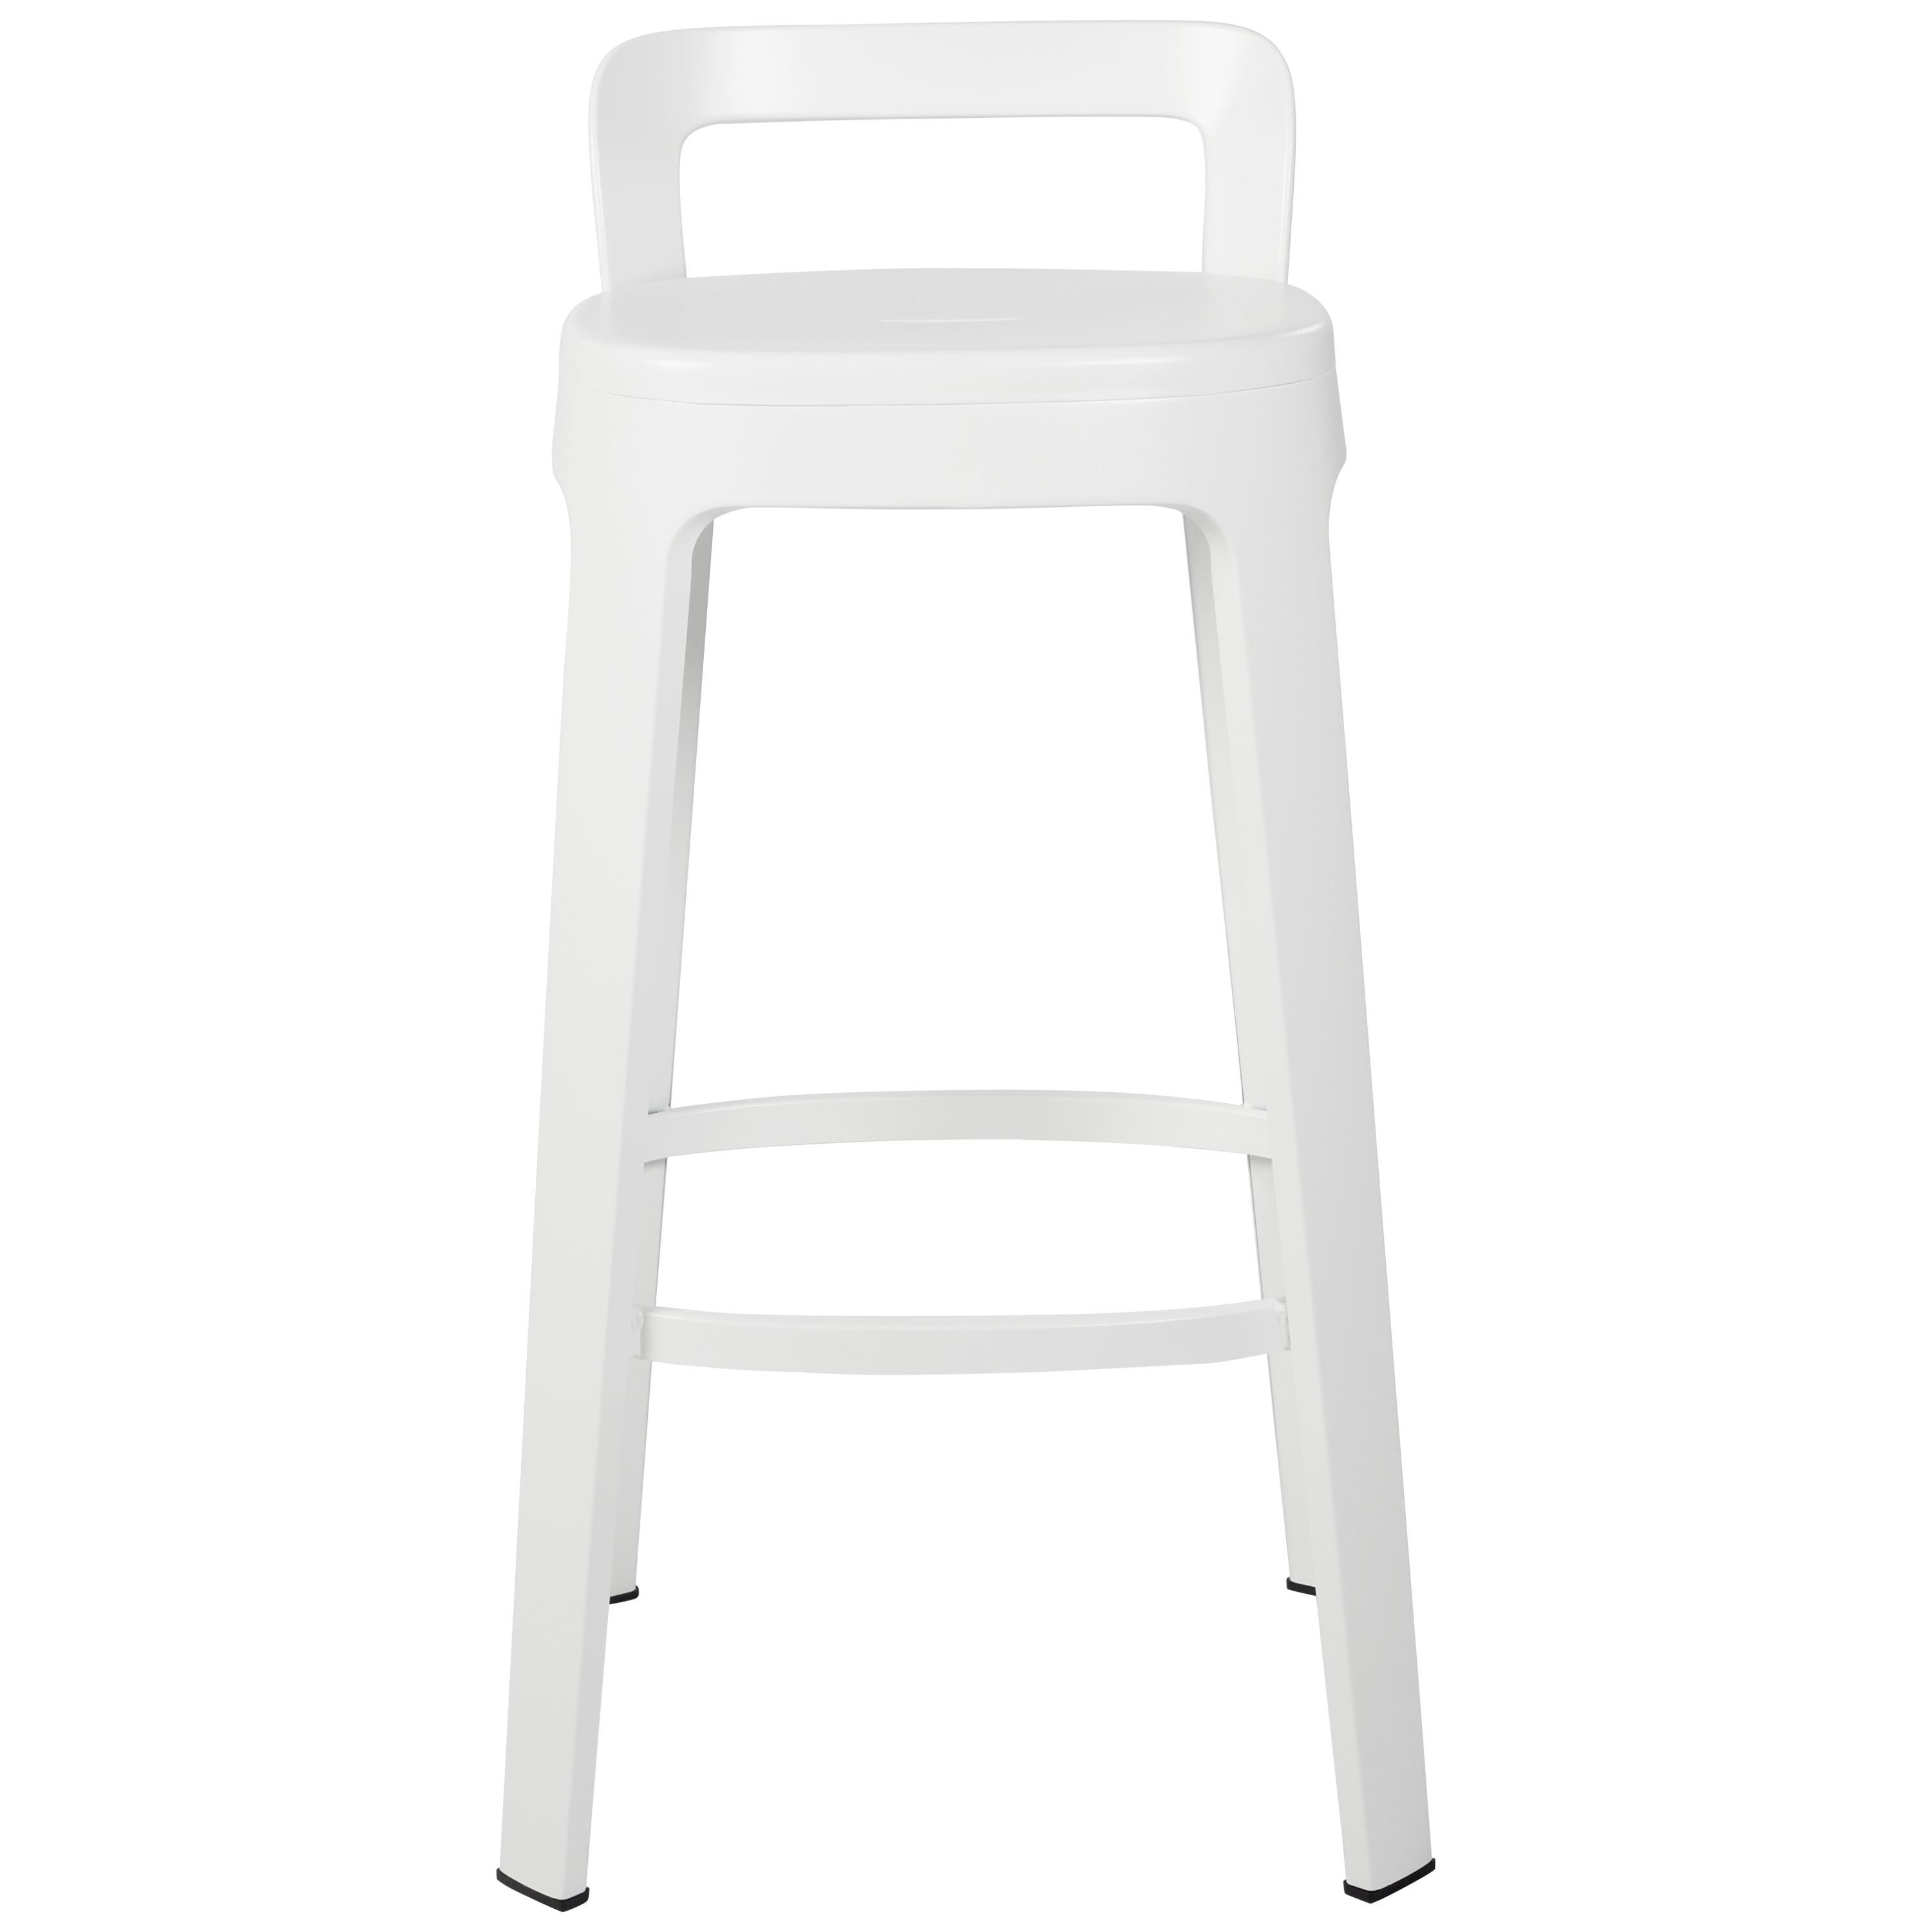 Ombra Bar Stool with Backrest, White by Emiliana Design Studio For Sale